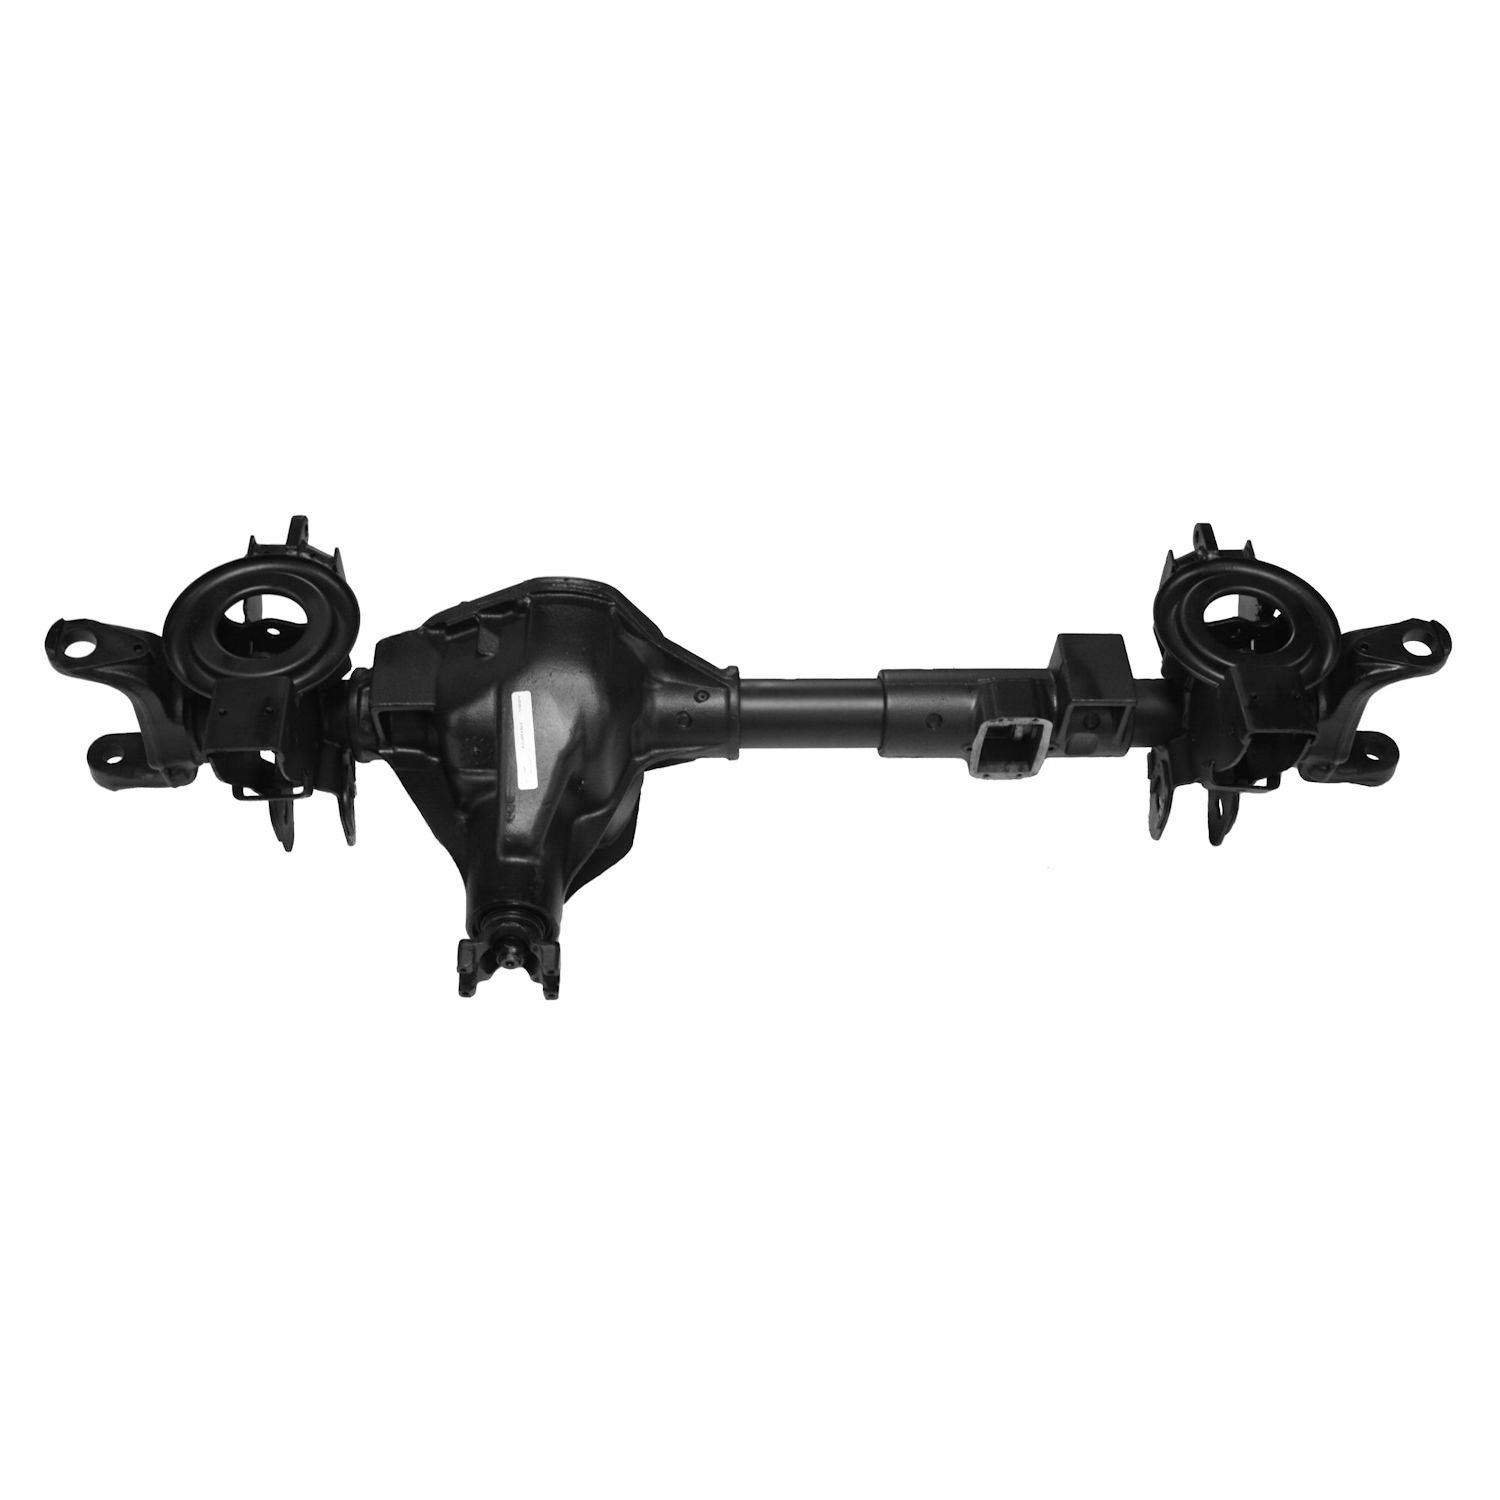 Remanufactured Complete Axle Assy for Dana 60 1998 Ram 2500 & 3500 3.54 with Rear ABS